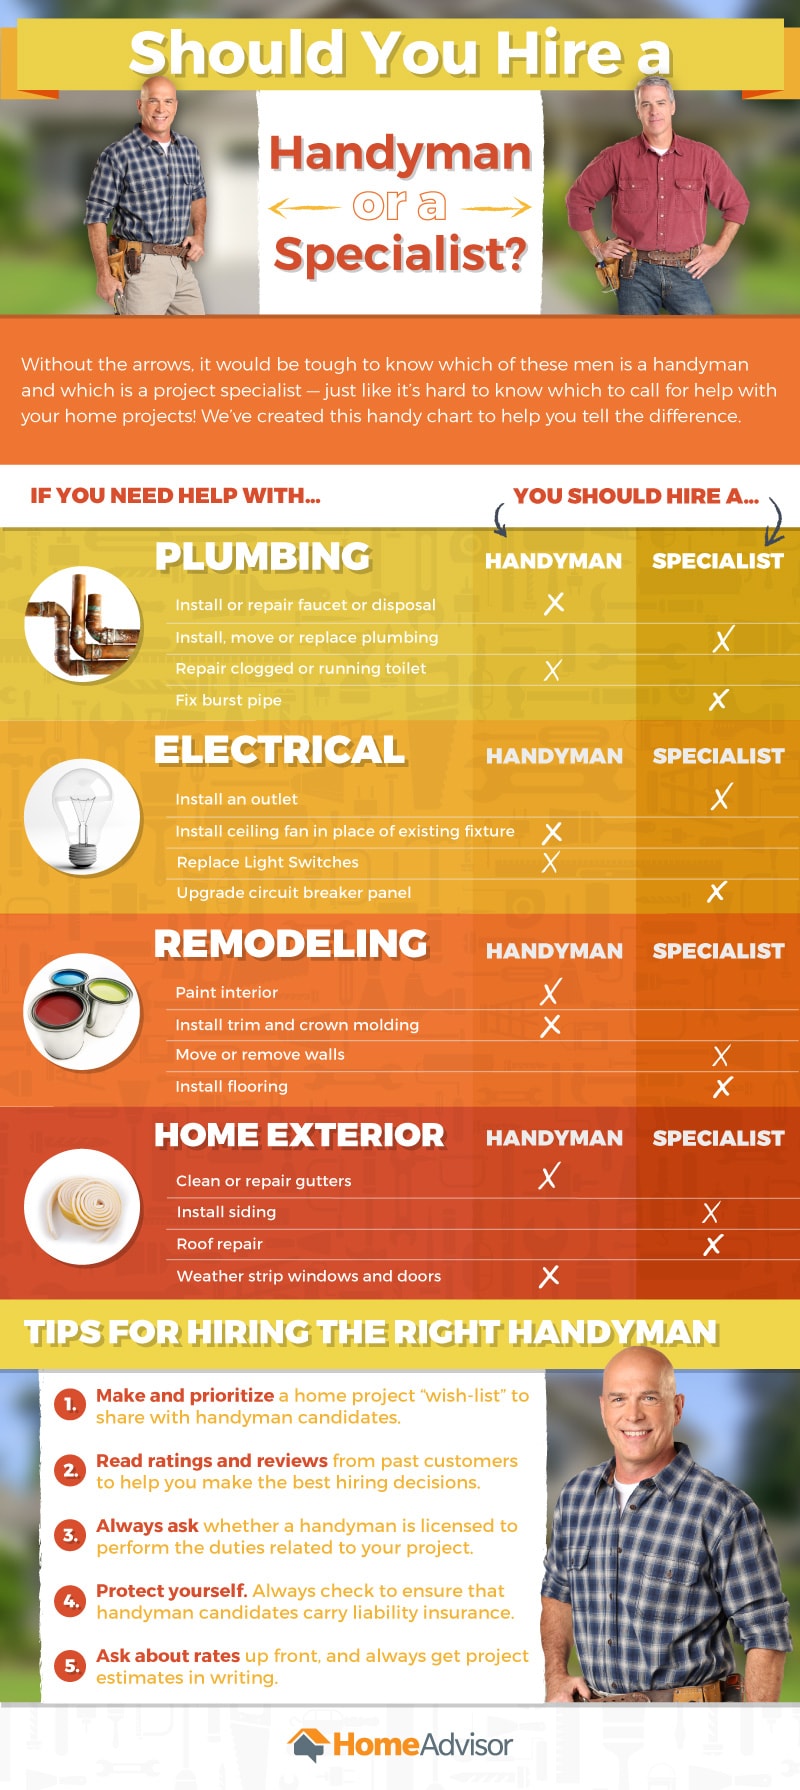 Should You Hire a Handyman or a Specialist